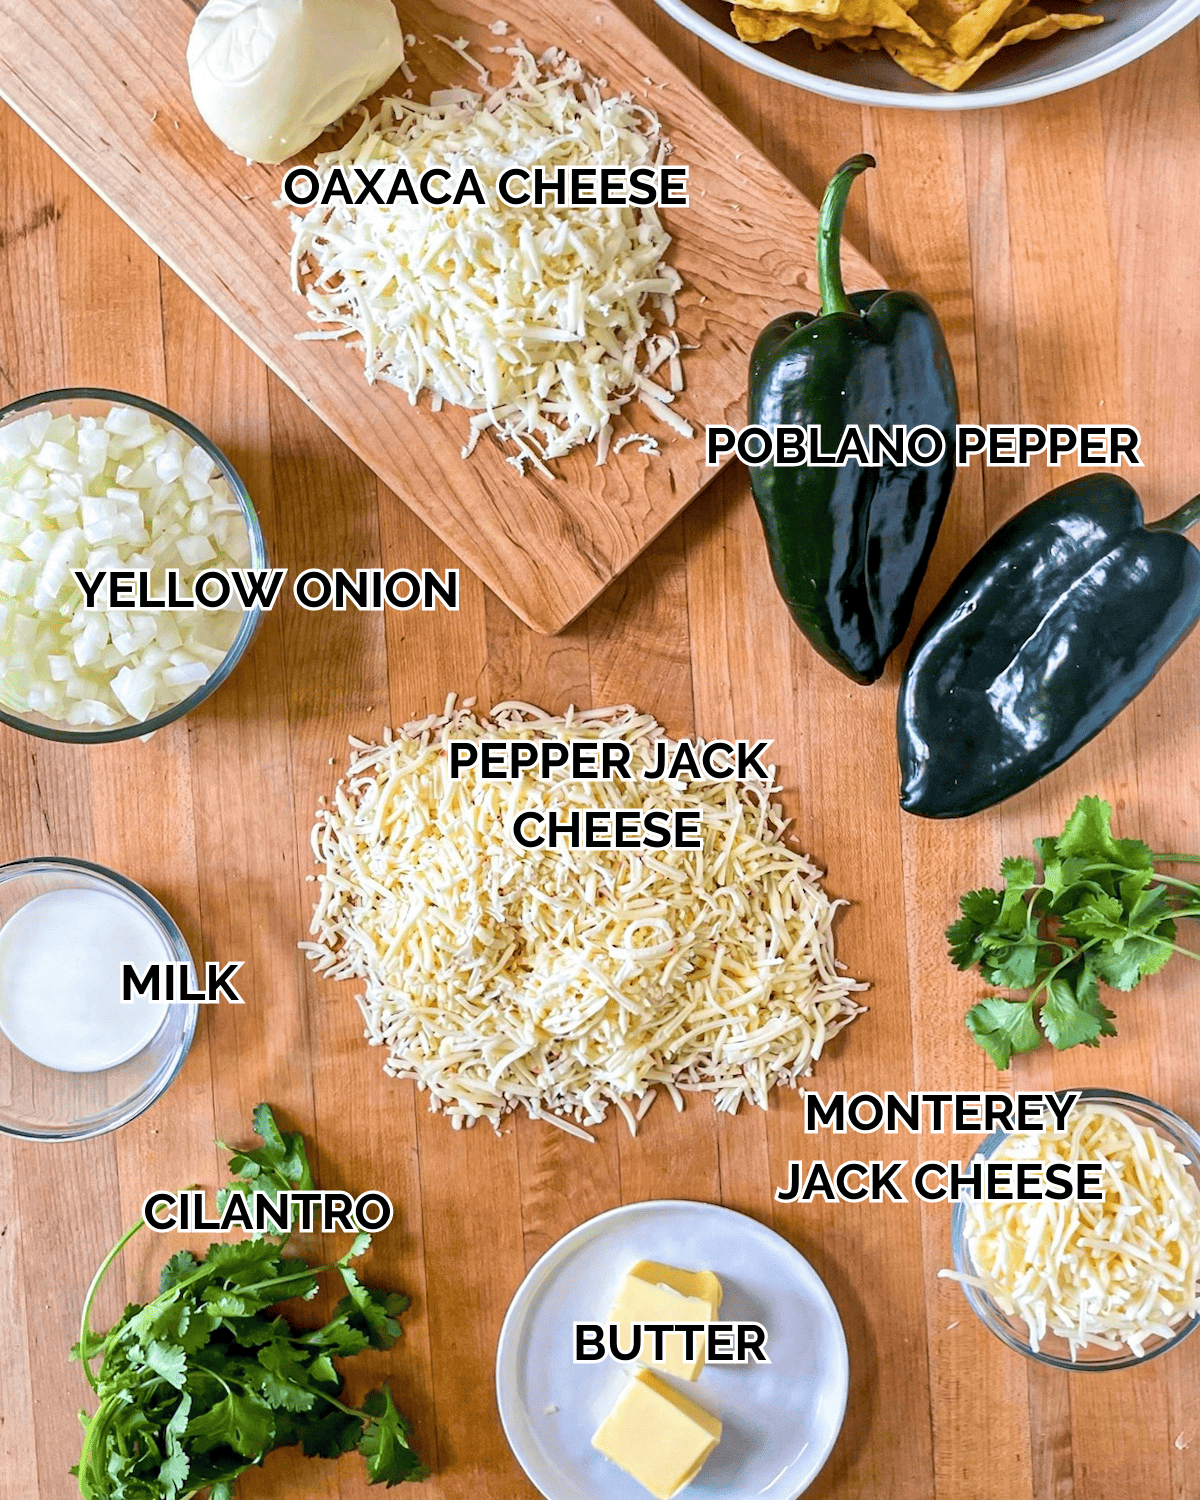 Queso Fundido Ingredients Poblano Peppers, Butter, Yellow Onion, Milk, Shredded Monterey Jack Cheese, Shredded Oaxaca Cheese, Shredded Pepper Jack Cheese, Tortilla Chips, Cilantro